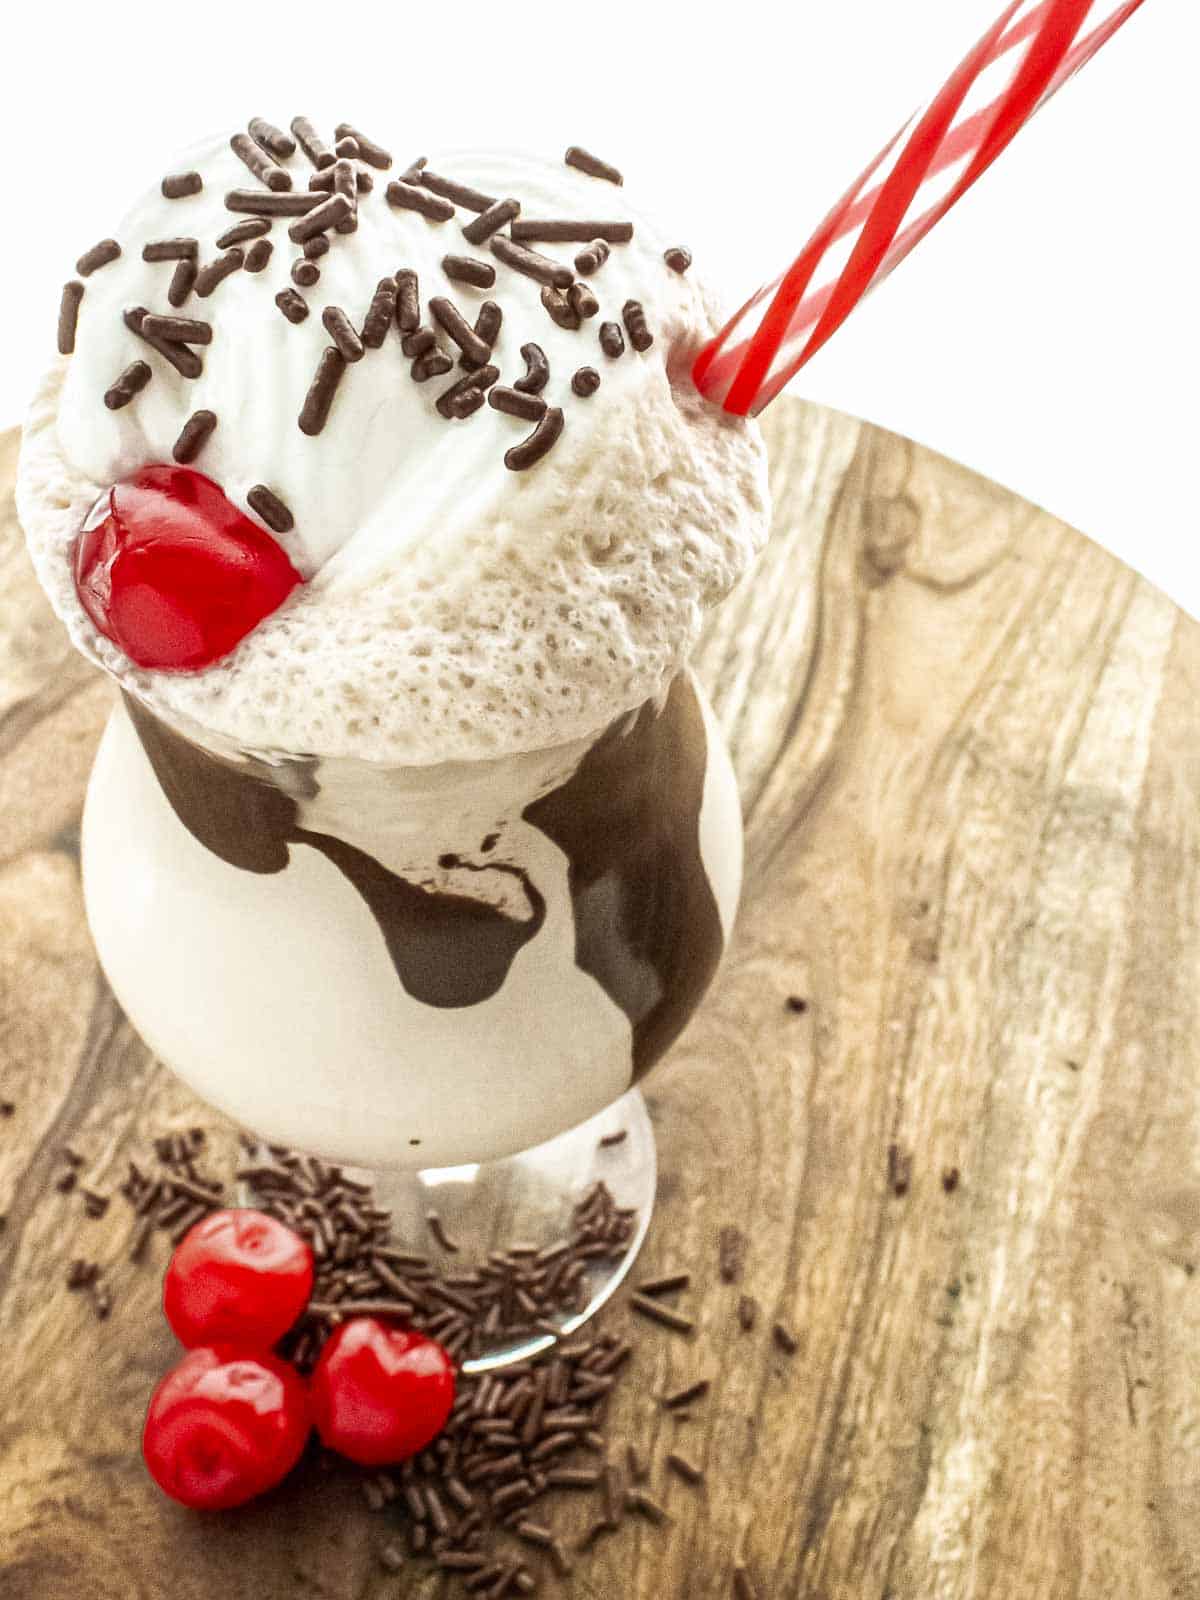 mudslide with sprinkles, cherry and a red striped straw